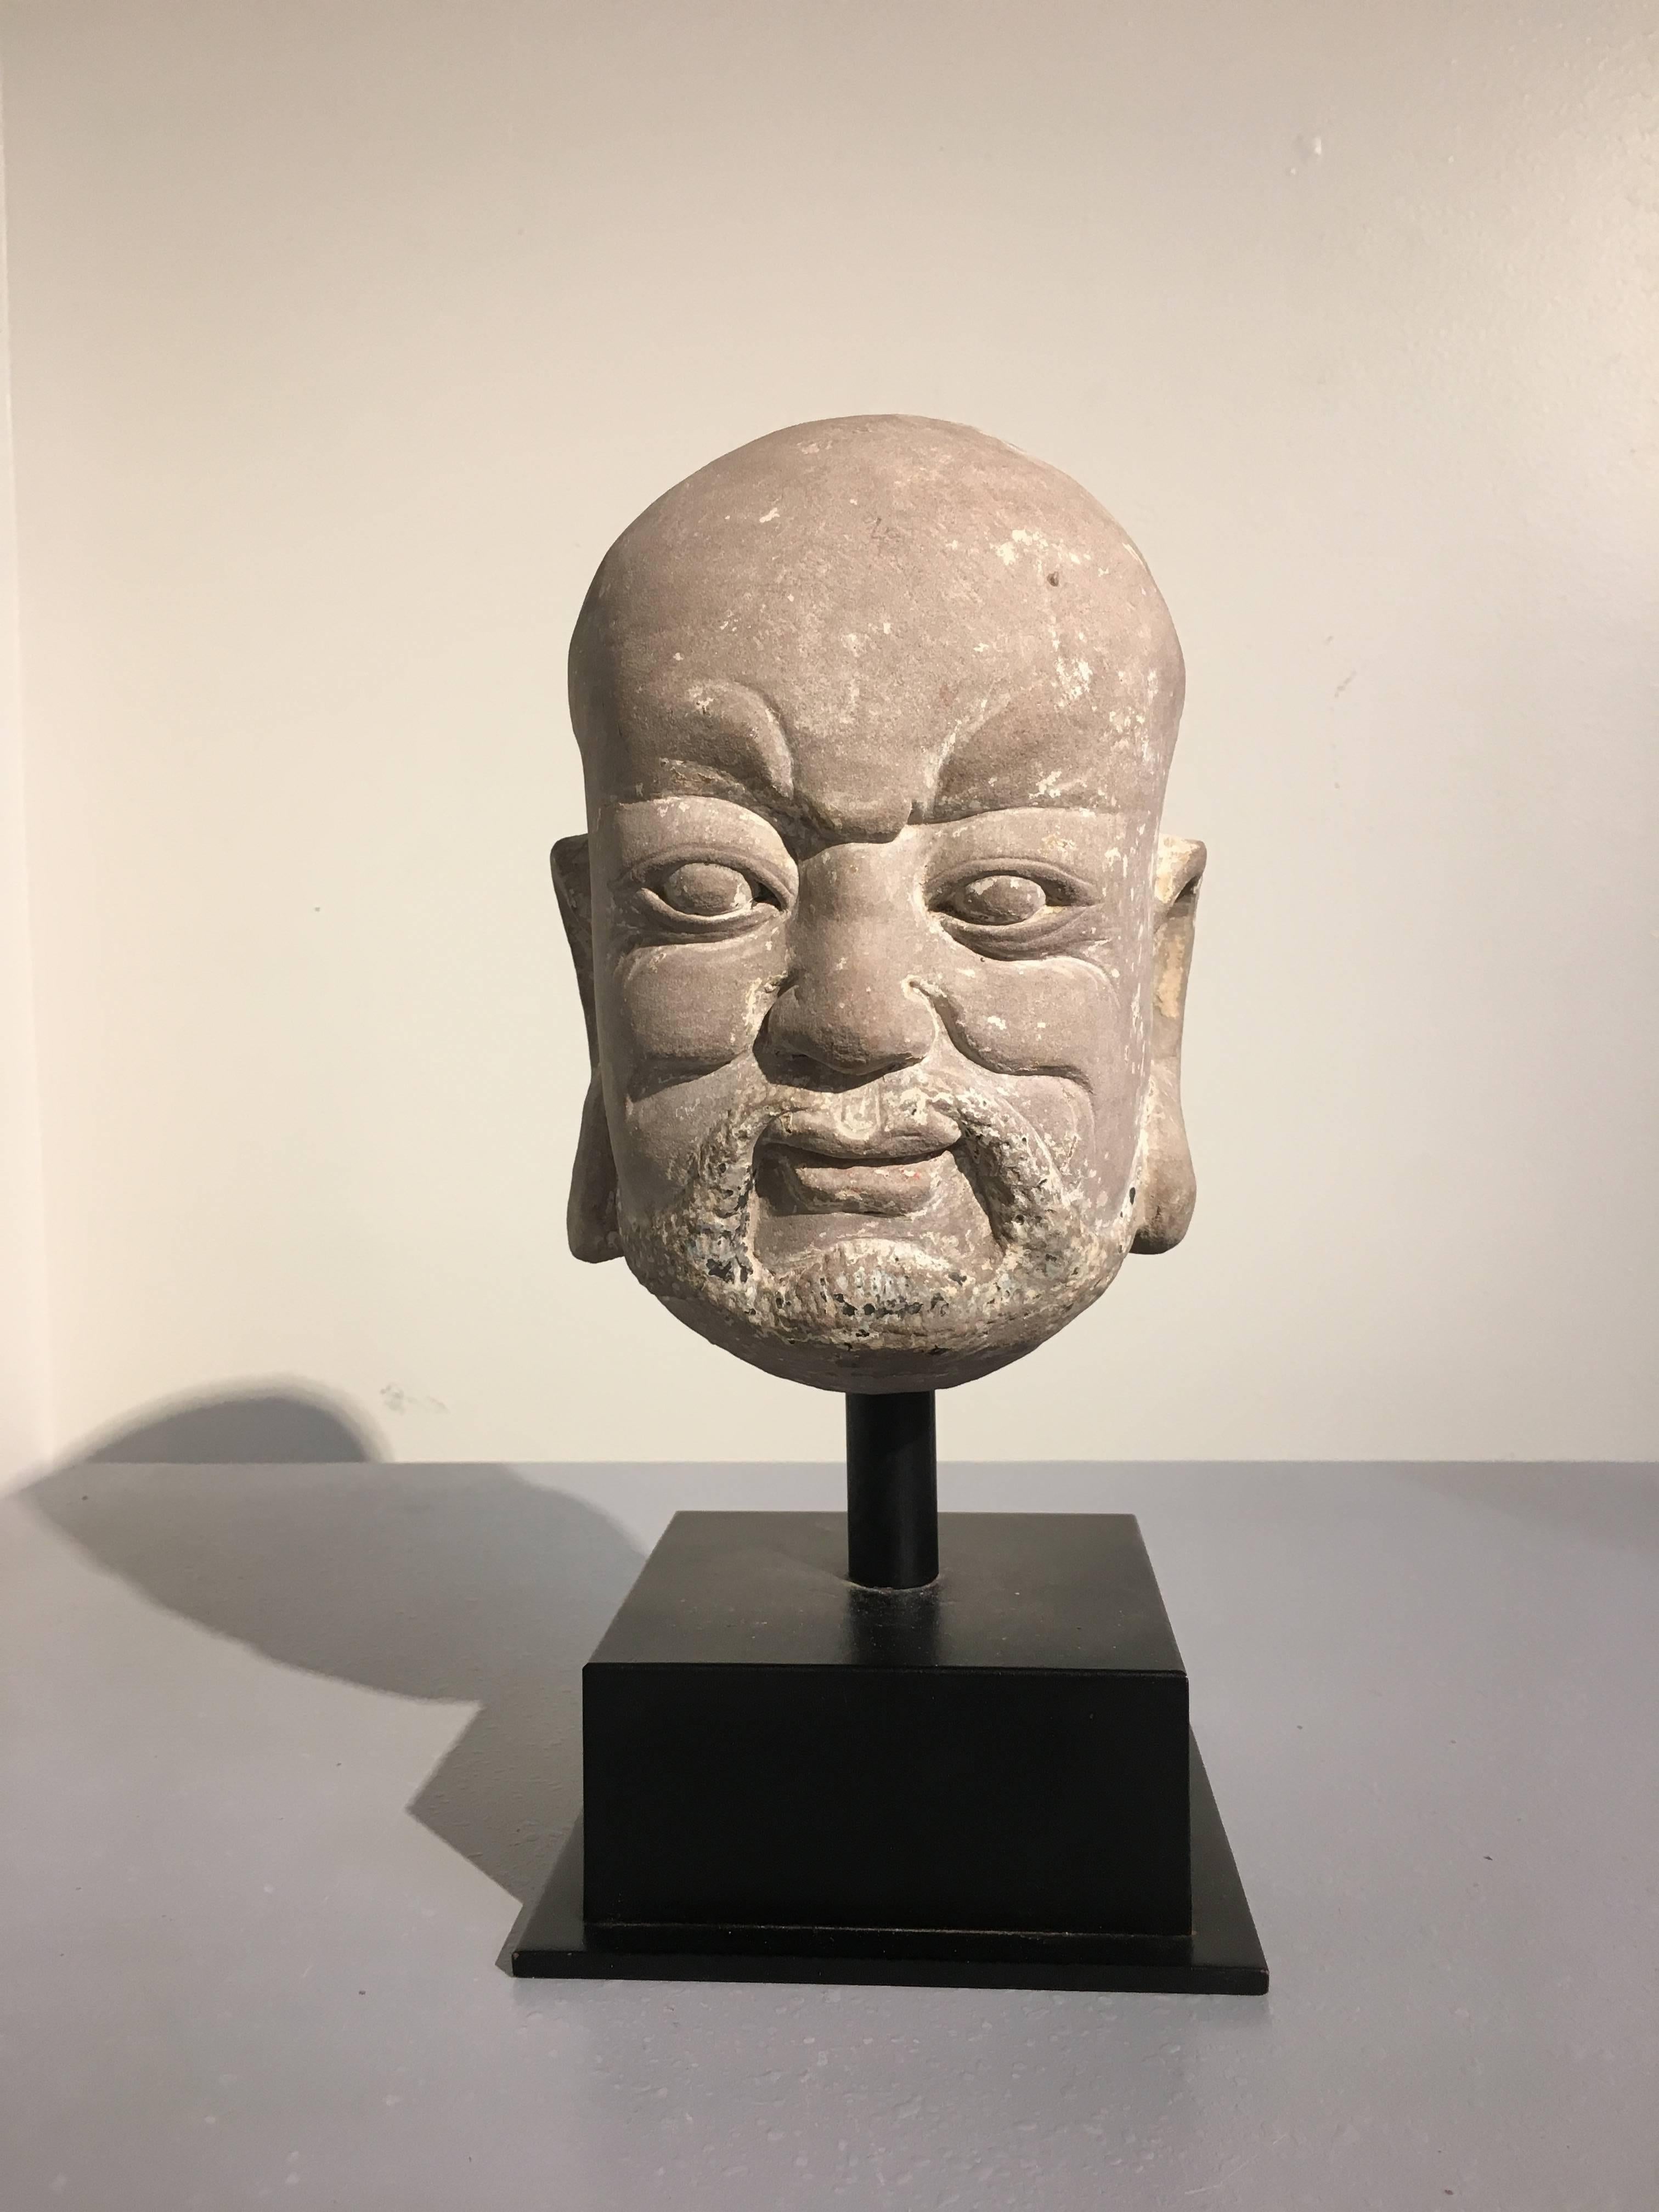 A well carved and expressive limestone head of a luohan, Yuan Dynasty (1271-1368), China. 
Luohan (lohan), also called arhats, were the original disciples of the Buddha and are revered figures in Buddhism. Chinese Buddhism names 18 original luohan,